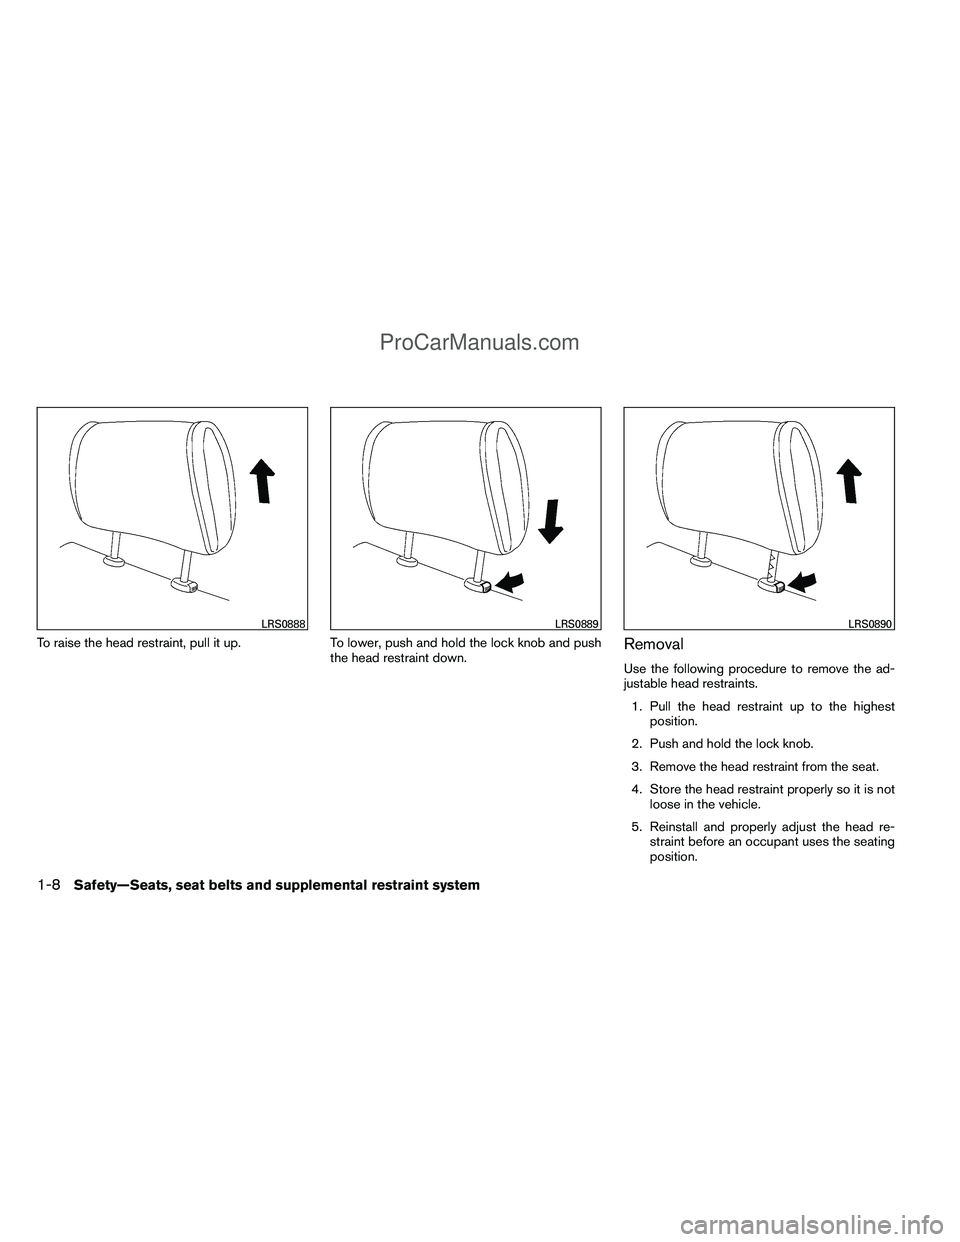 NISSAN TITAN 2012 Owners Manual To raise the head restraint, pull it up.To lower, push and hold the lock knob and push
the head restraint down.Removal
Use the following procedure to remove the ad-
justable head restraints.
1. Pull t